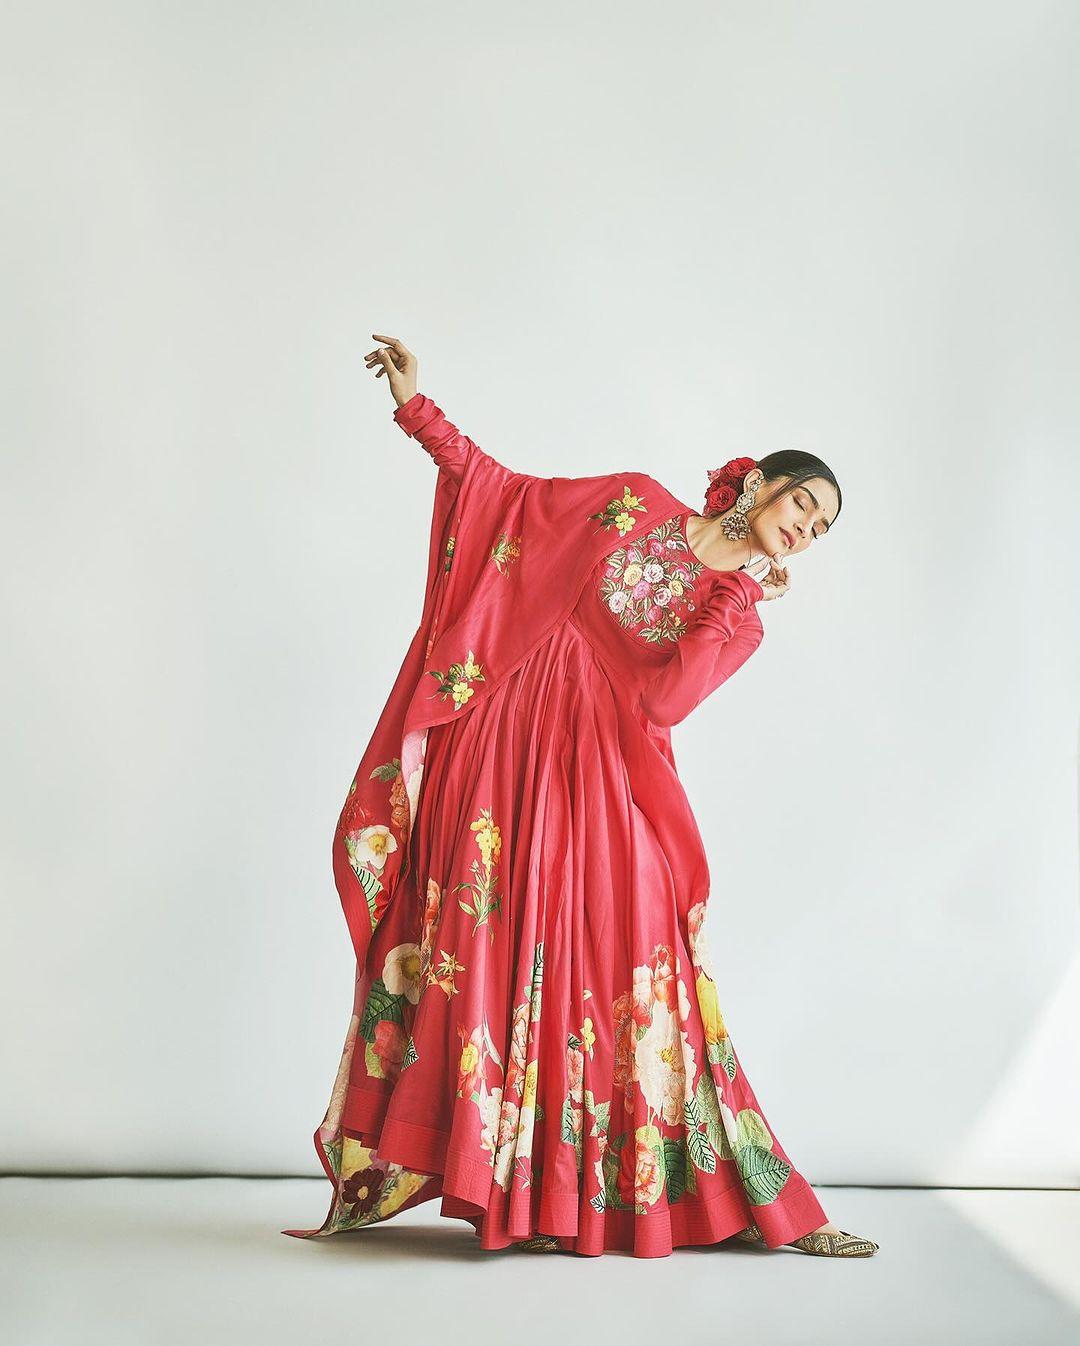 In this look, Sonam wore a stunning red full-sleeves Anarkali suit, which she paired with a matching dupatta. Sonam's suit and dupatta have matching floral prints on them, which make it even more apt for the occasion